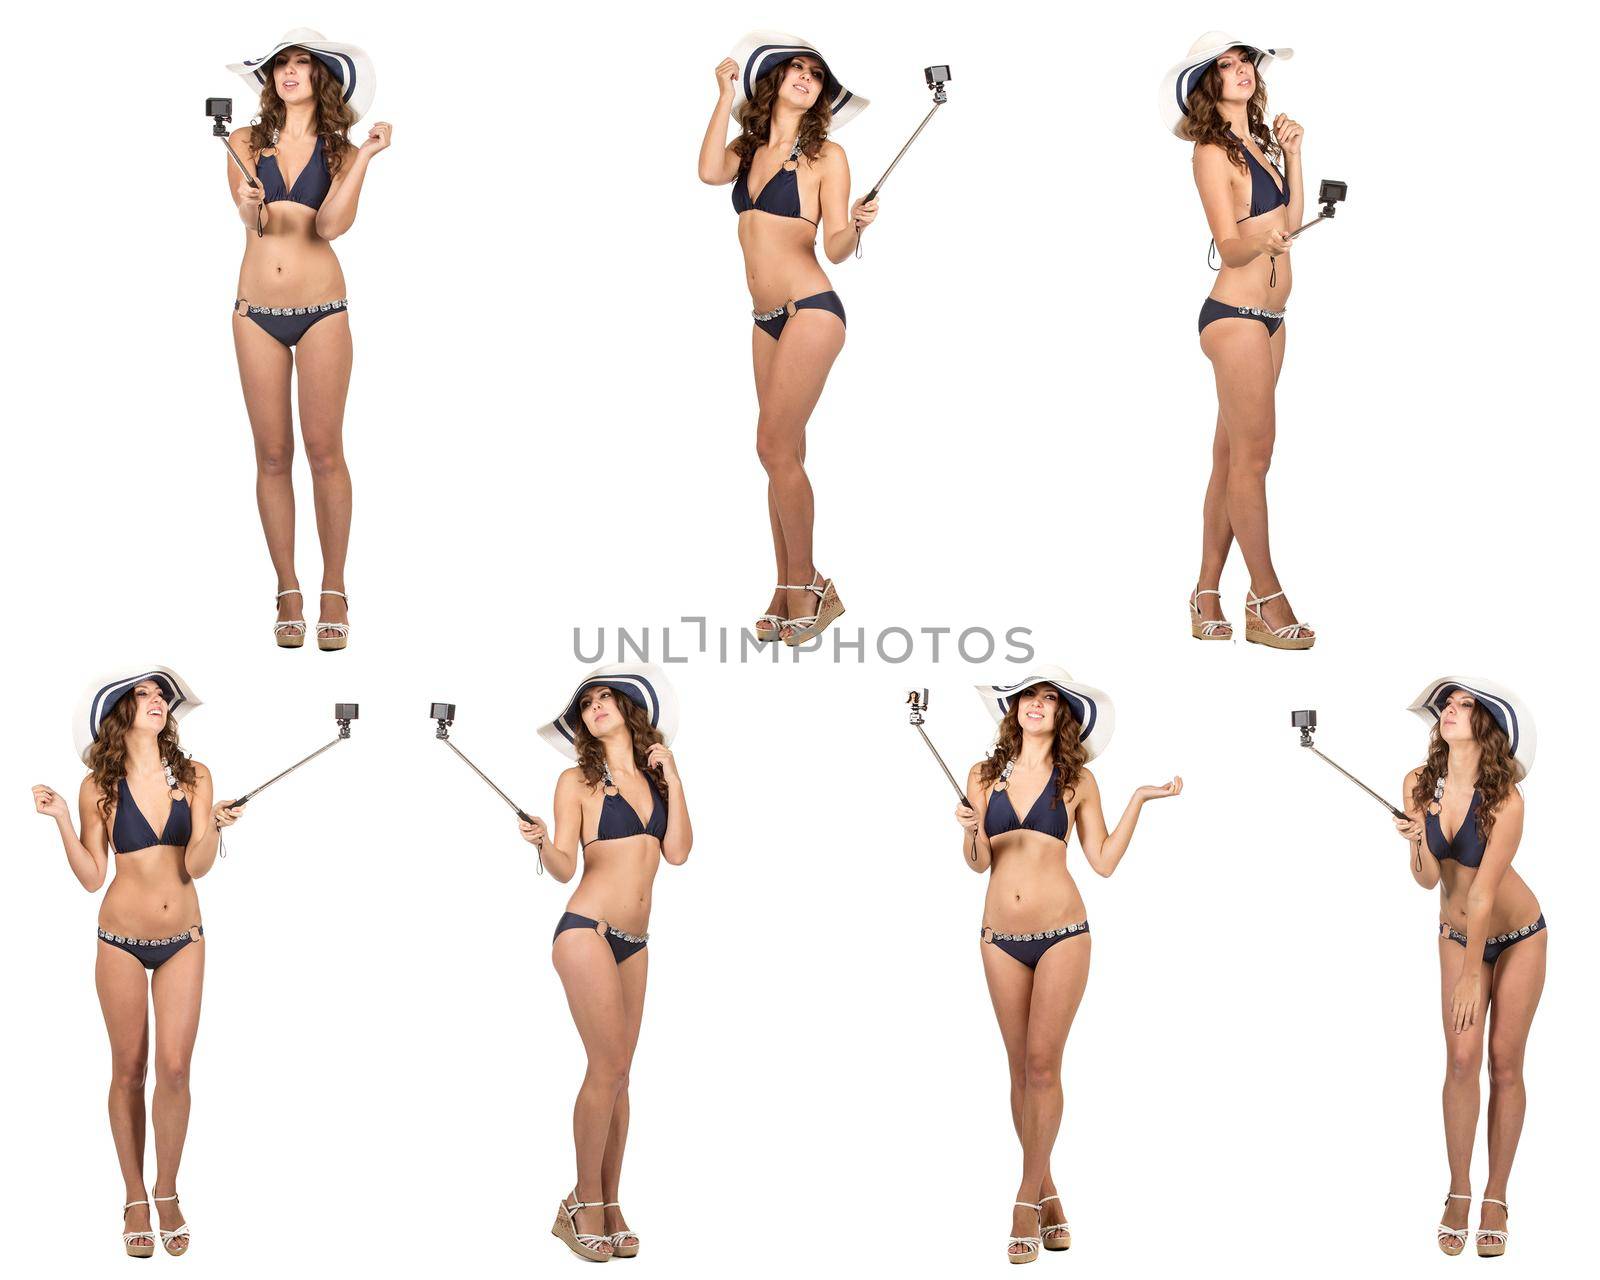 Travel concept. Studio portrait of pretty young woman taking selfie with action camera. Isolated on white.